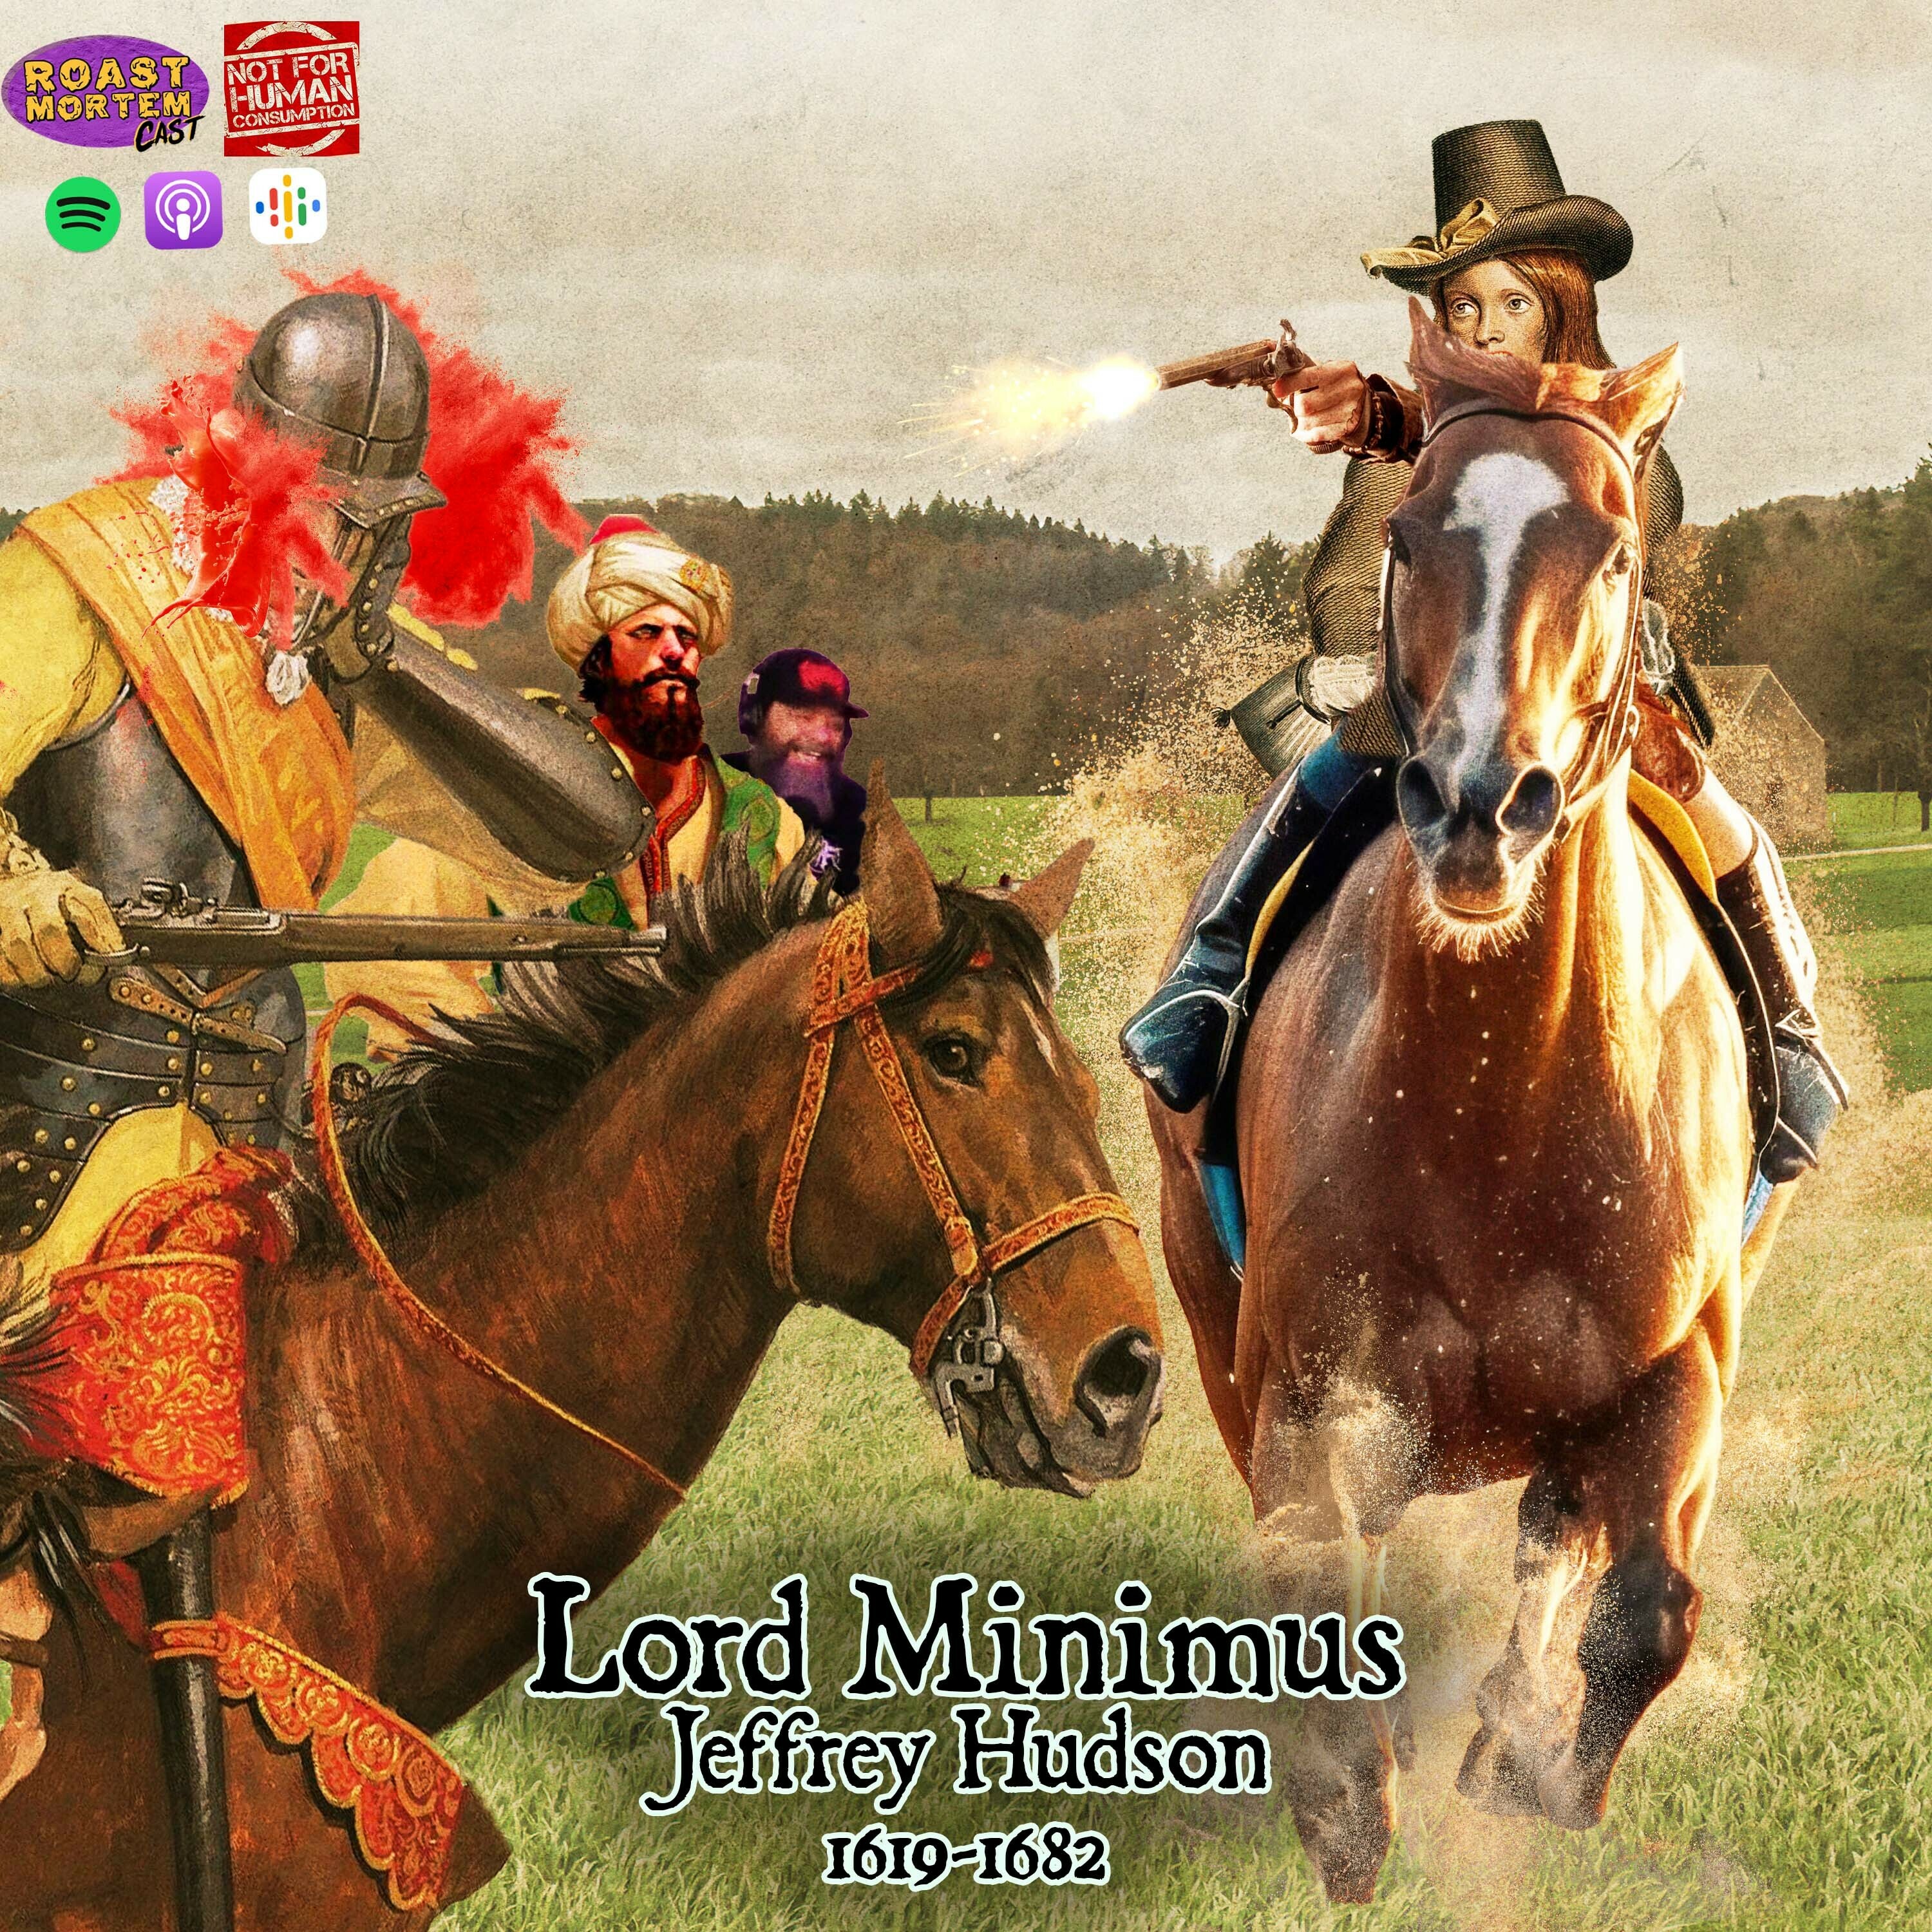 285 Lord Minimus (Jeffrey Hudson) pt.3: A loss and gain of stature